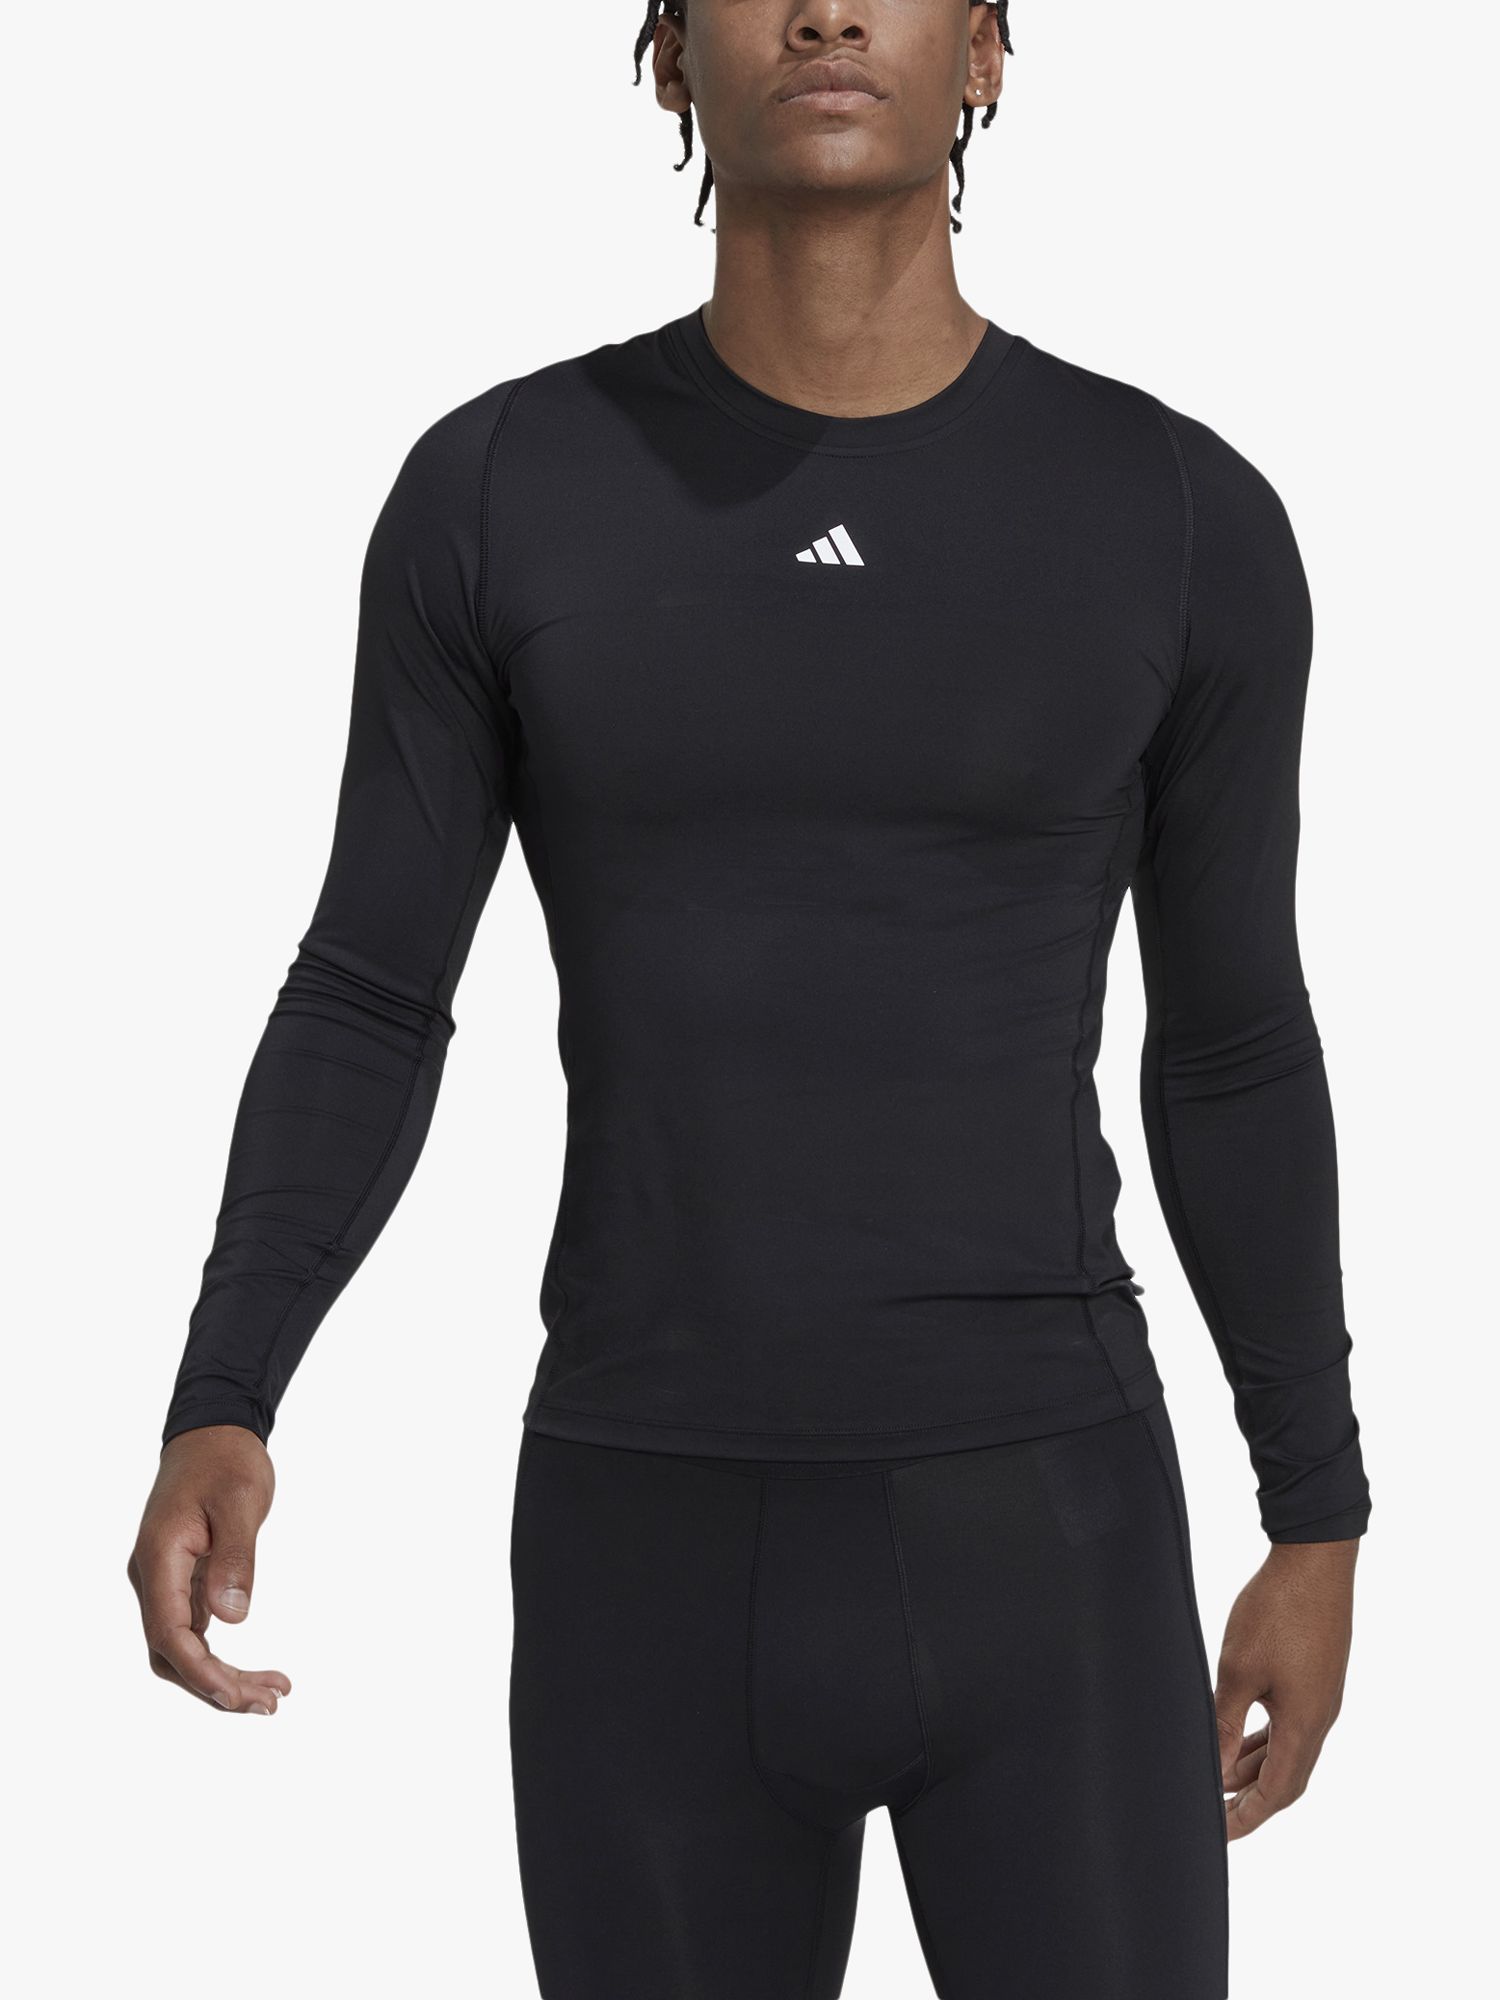 adidas Techfit Long Sleeve Compression Gym Top, Black, S